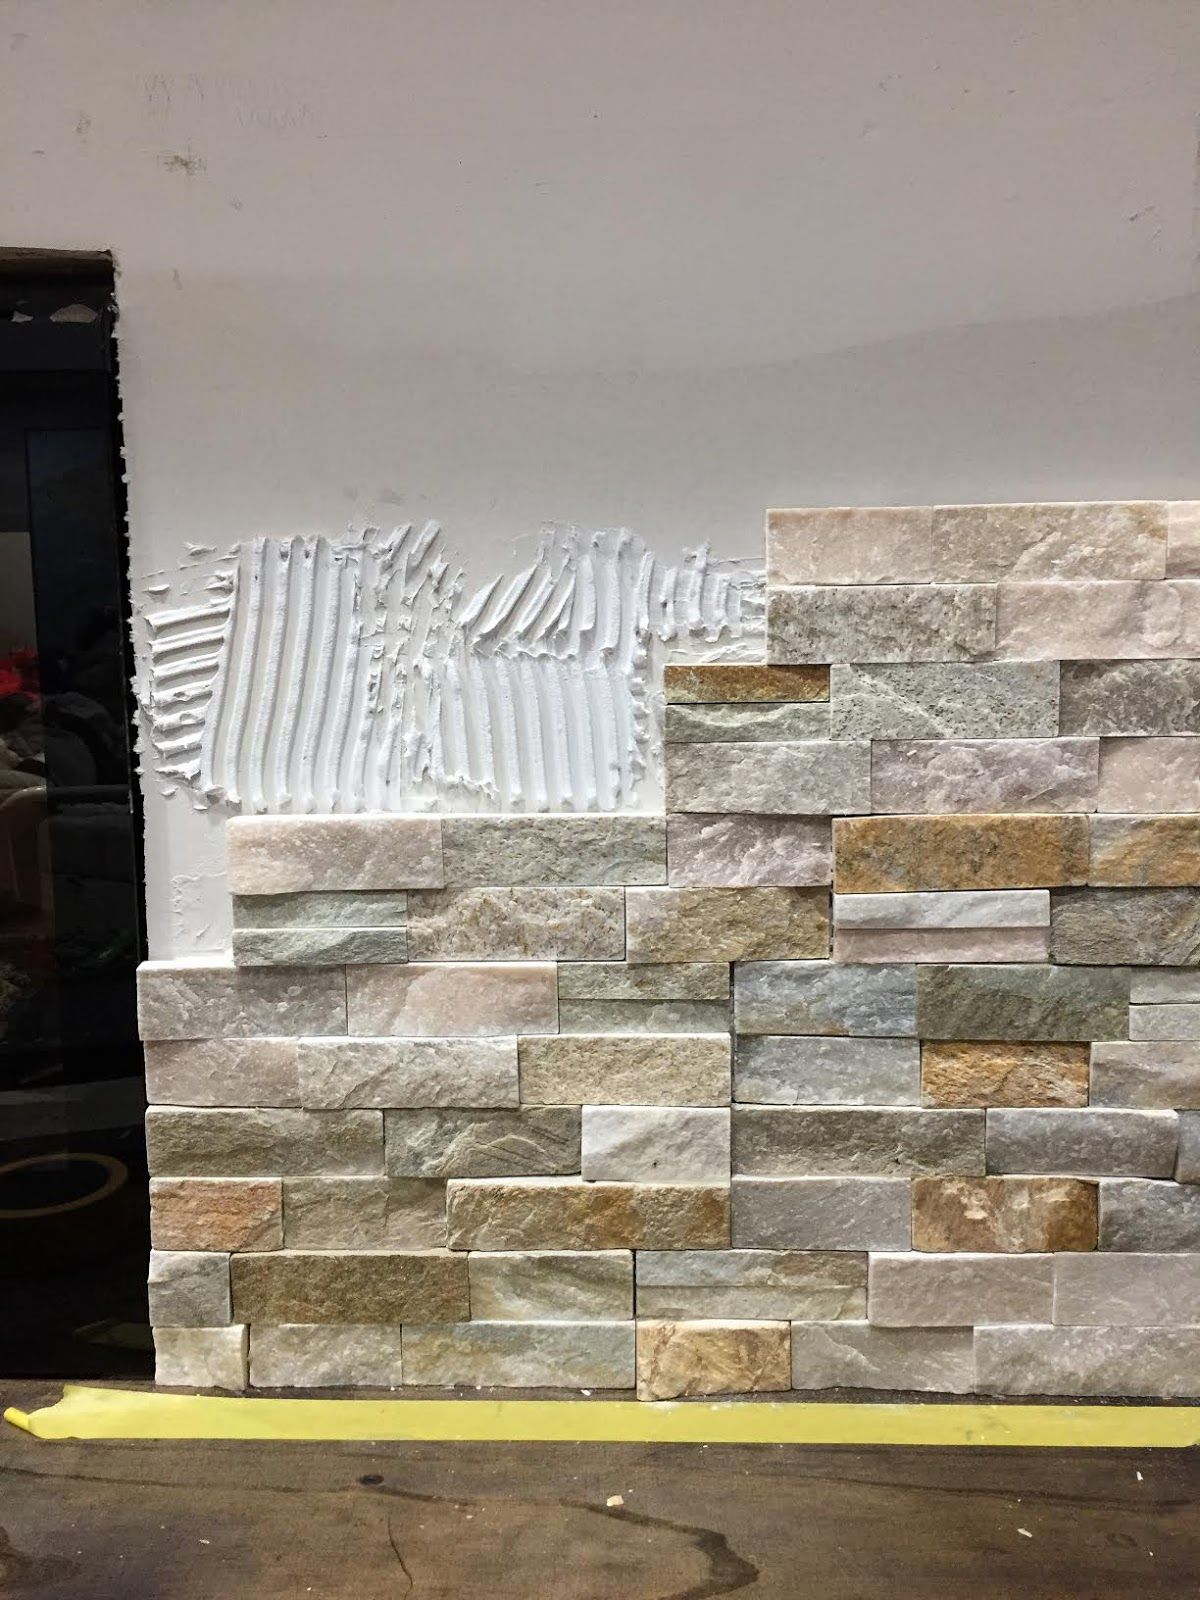 Fireplace Feature Wall Inspirational How to Install Stacked Stone Tile On A Fireplace Wall